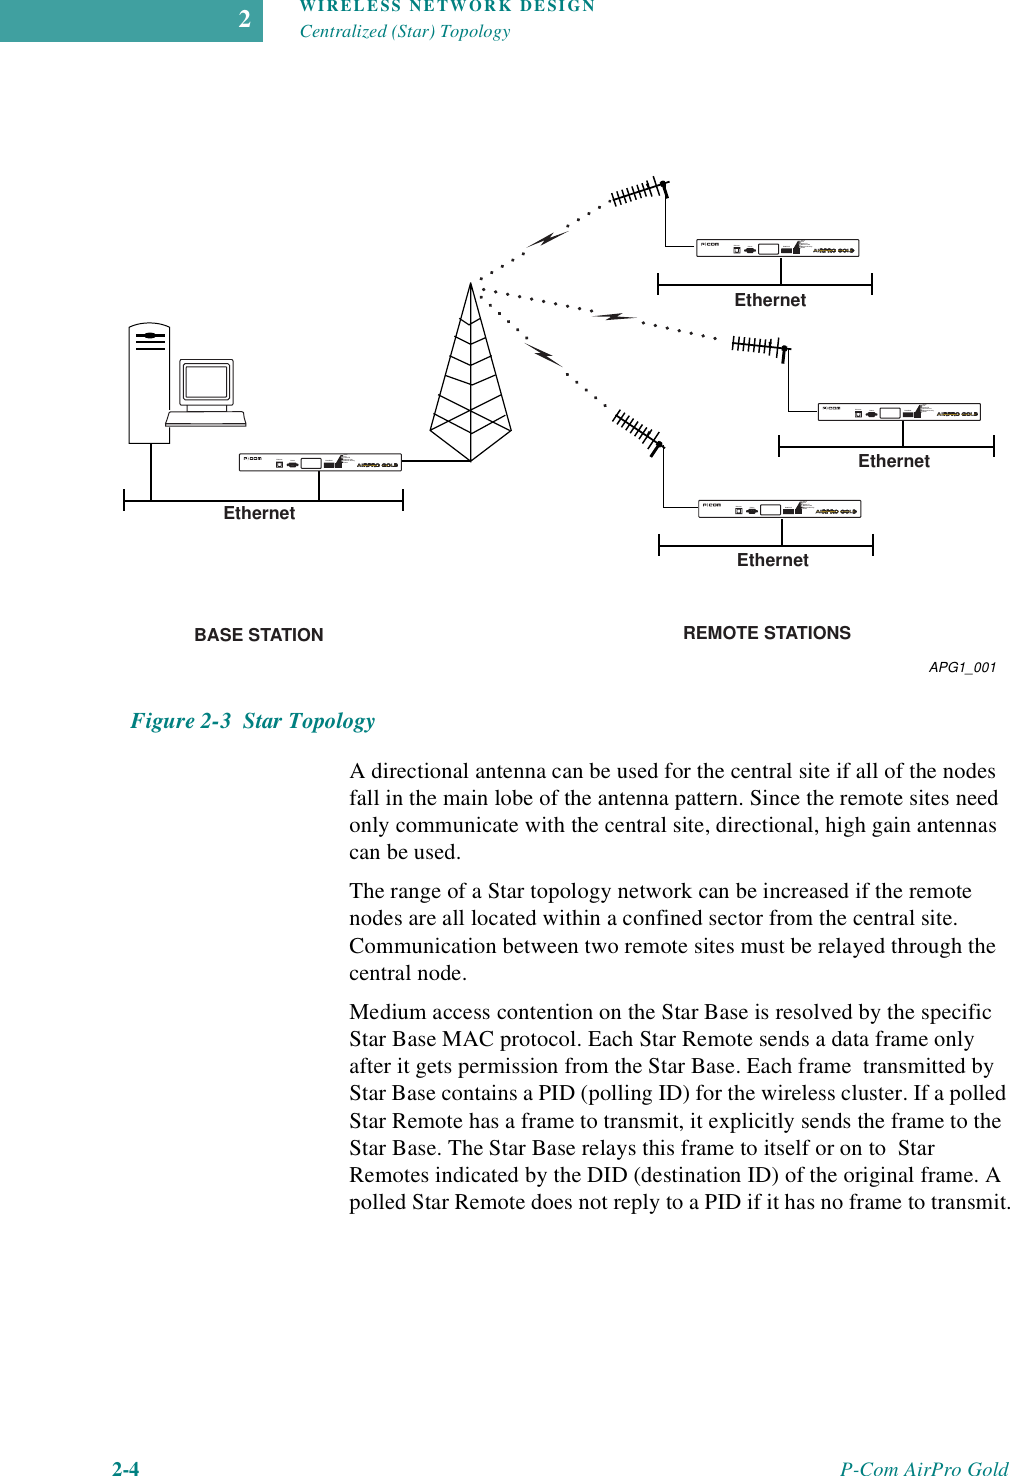 WIRELESS NETWORK DESIGNCentralized (Star) Topology2-4 P-Com AirPro Gold2Figure 2-3  Star TopologyA directional antenna can be used for the central site if all of the nodes fall in the main lobe of the antenna pattern. Since the remote sites need only communicate with the central site, directional, high gain antennas can be used.The range of a Star topology network can be increased if the remote nodes are all located within a confined sector from the central site. Communication between two remote sites must be relayed through the central node.Medium access contention on the Star Base is resolved by the specific Star Base MAC protocol. Each Star Remote sends a data frame only after it gets permission from the Star Base. Each frame  transmitted by  Star Base contains a PID (polling ID) for the wireless cluster. If a polled Star Remote has a frame to transmit, it explicitly sends the frame to the Star Base. The Star Base relays this frame to itself or on to  Star Remotes indicated by the DID (destination ID) of the original frame. A polled Star Remote does not reply to a PID if it has no frame to transmit.APG1_001BASE STATION REMOTE STATIONSEthernetEthernetEthernetEthernetEthernet RS232 RSQ/RSSIAlarmLinkFrame TXEthernet LinkEthernet ActivityPowerEthernet RS232 RSQ/RSSIAlarmLinkFrame TXEthernet LinkEthernet ActivityPowerEthernet RS232 RSQ/RSSIAlarmLinkFrame TXEthernet LinkEthernet ActivityPowerEthernet RS232 RSQ/RSSIAlarmLinkFrame TXEthernet LinkEthernet ActivityPower